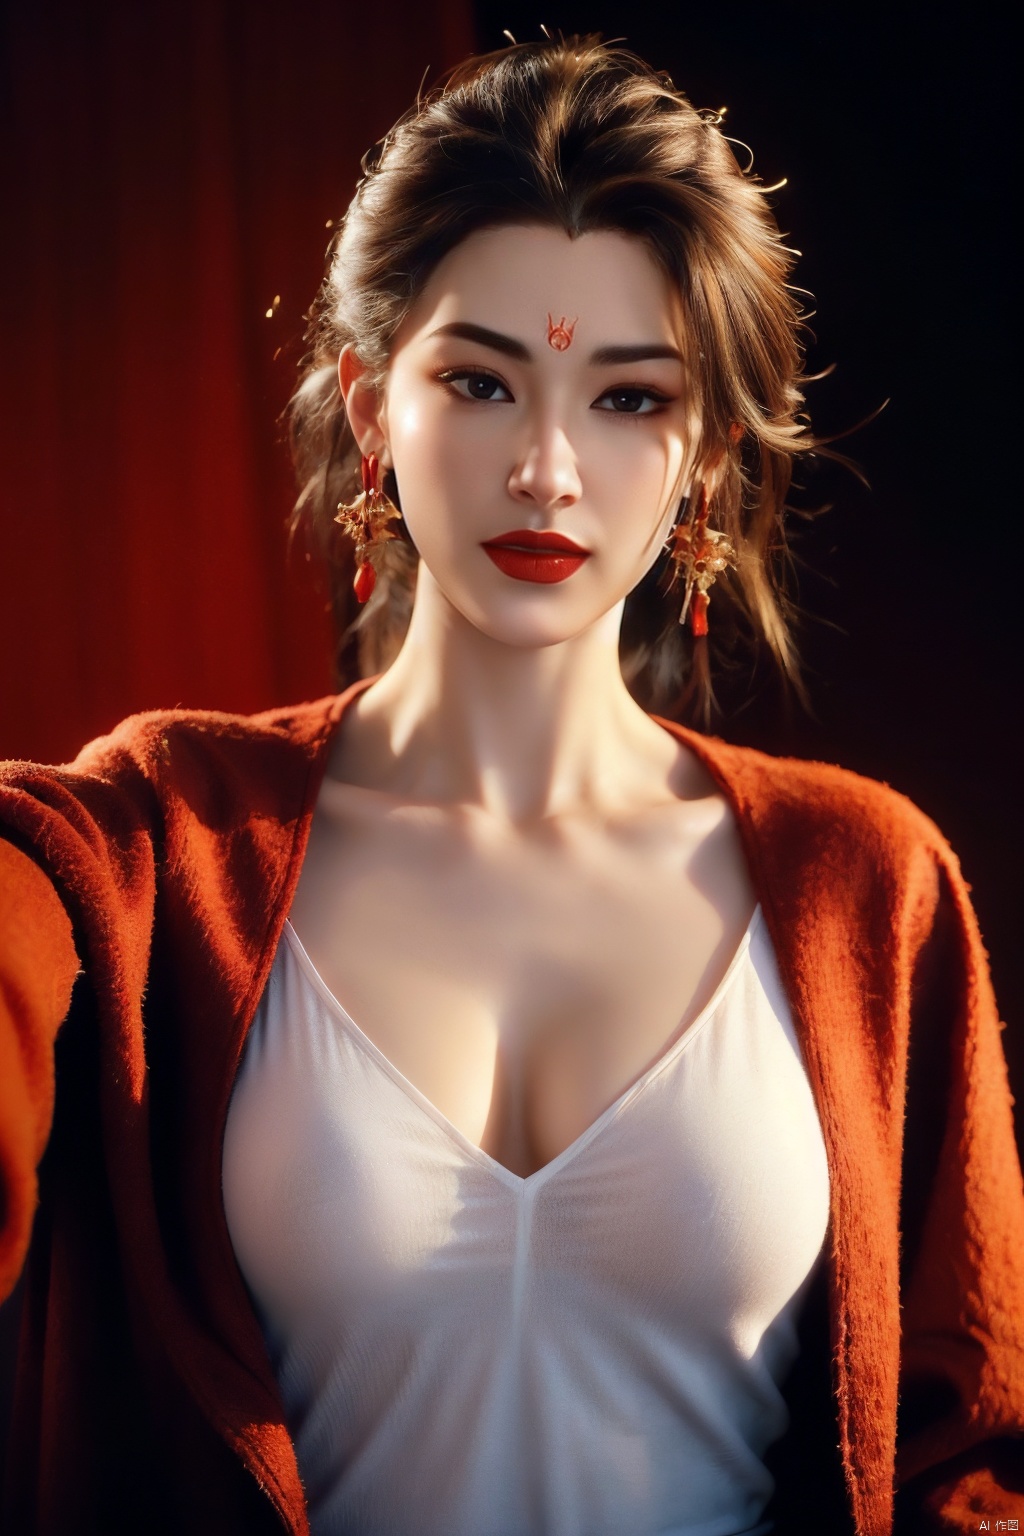  Girl, red wool coat, pretty face, short hair, blonde hair, (photo reality: 1.3) , Edge lighting, (high detail skin: 1.2) , 8K Ultra HD, high quality, high resolution, best ratio of four fingers and one thumb, (photo reality: 1.3) , wearing a red coat, white shirt inside, large breasts, solid color background, solid red background, advanced feeling, texture pull full, 1 girl, xiqing, hszt, xiaxue, dongji